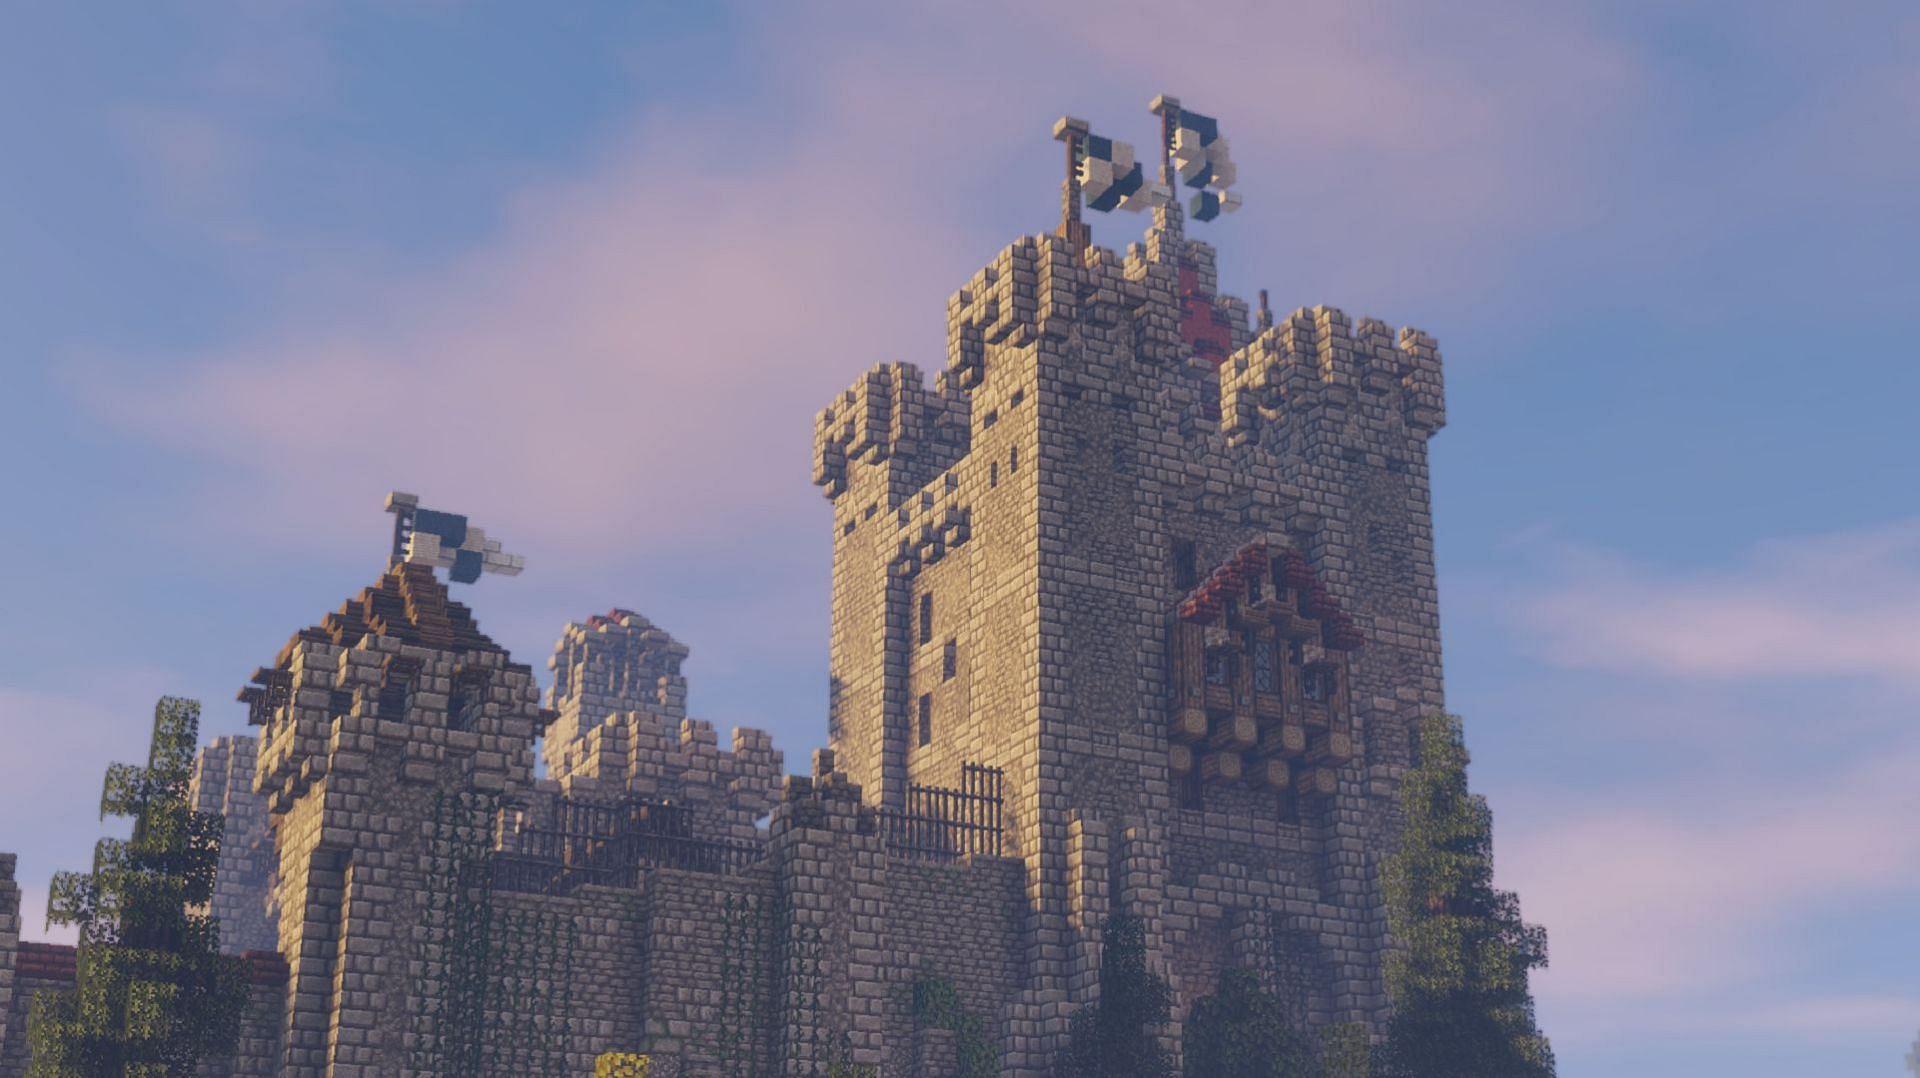 Excalibur can merge with Minecraft shaders to create magnificent fantasy medieval visuals (Image via Maffhew/CurseForge)